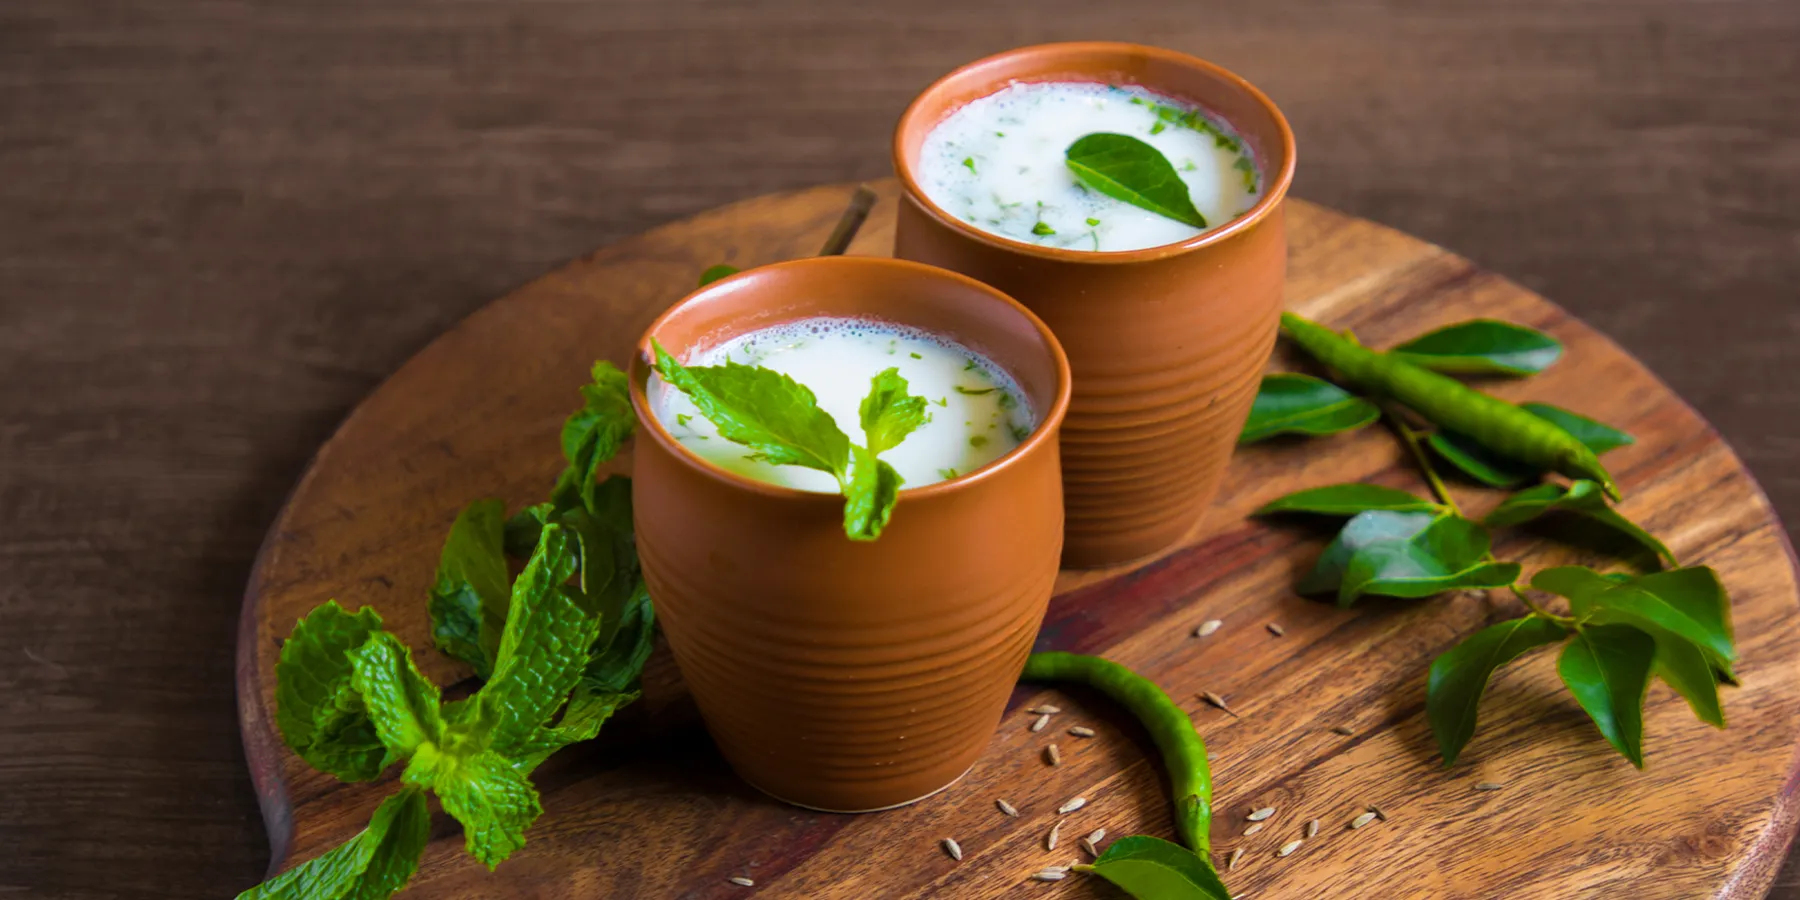 What Makes Buttermilk a Summer Staple in India